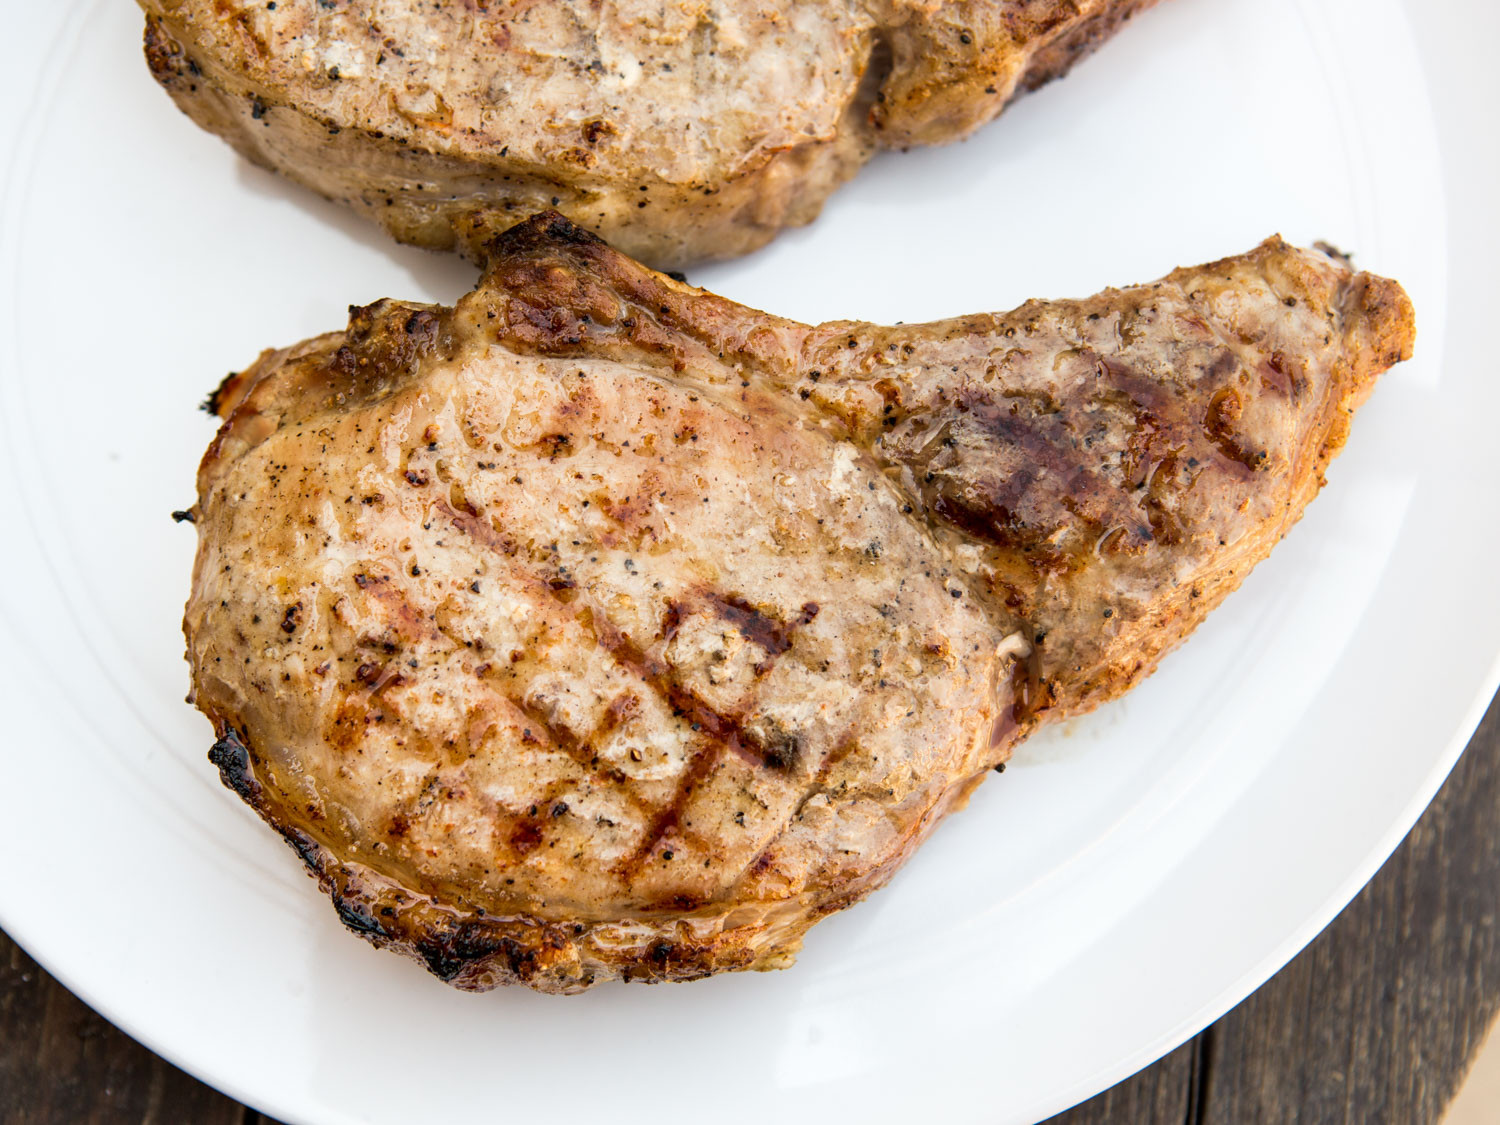 Recipes For Grilled Pork Chops
 The Best Juicy Grilled Pork Chops Recipe